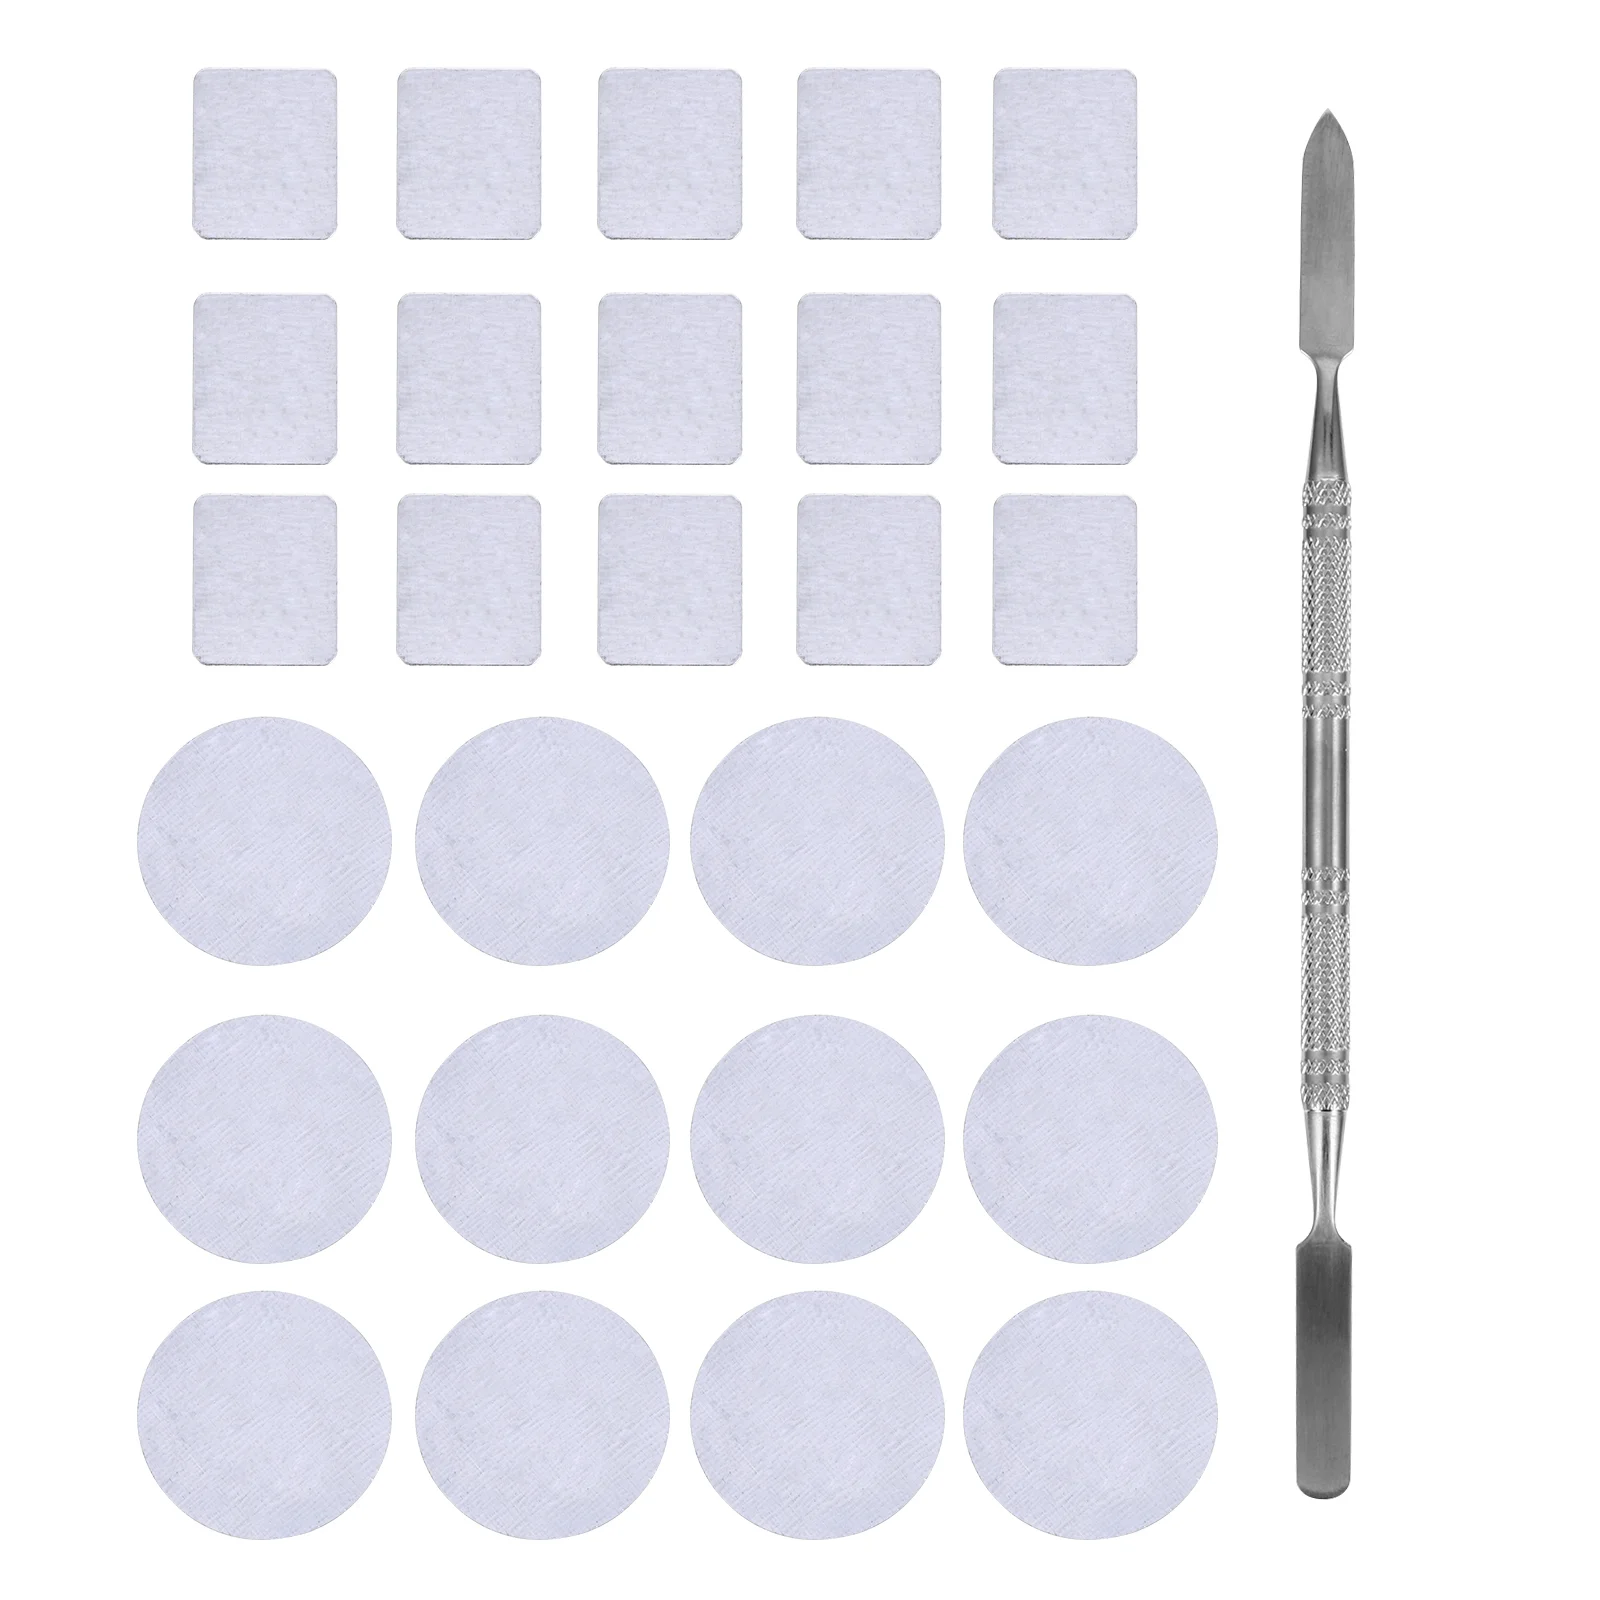 

56 Pcs Makeup Palette Stickers Empty Magnet Stainless Steel Metal Eyeshadow